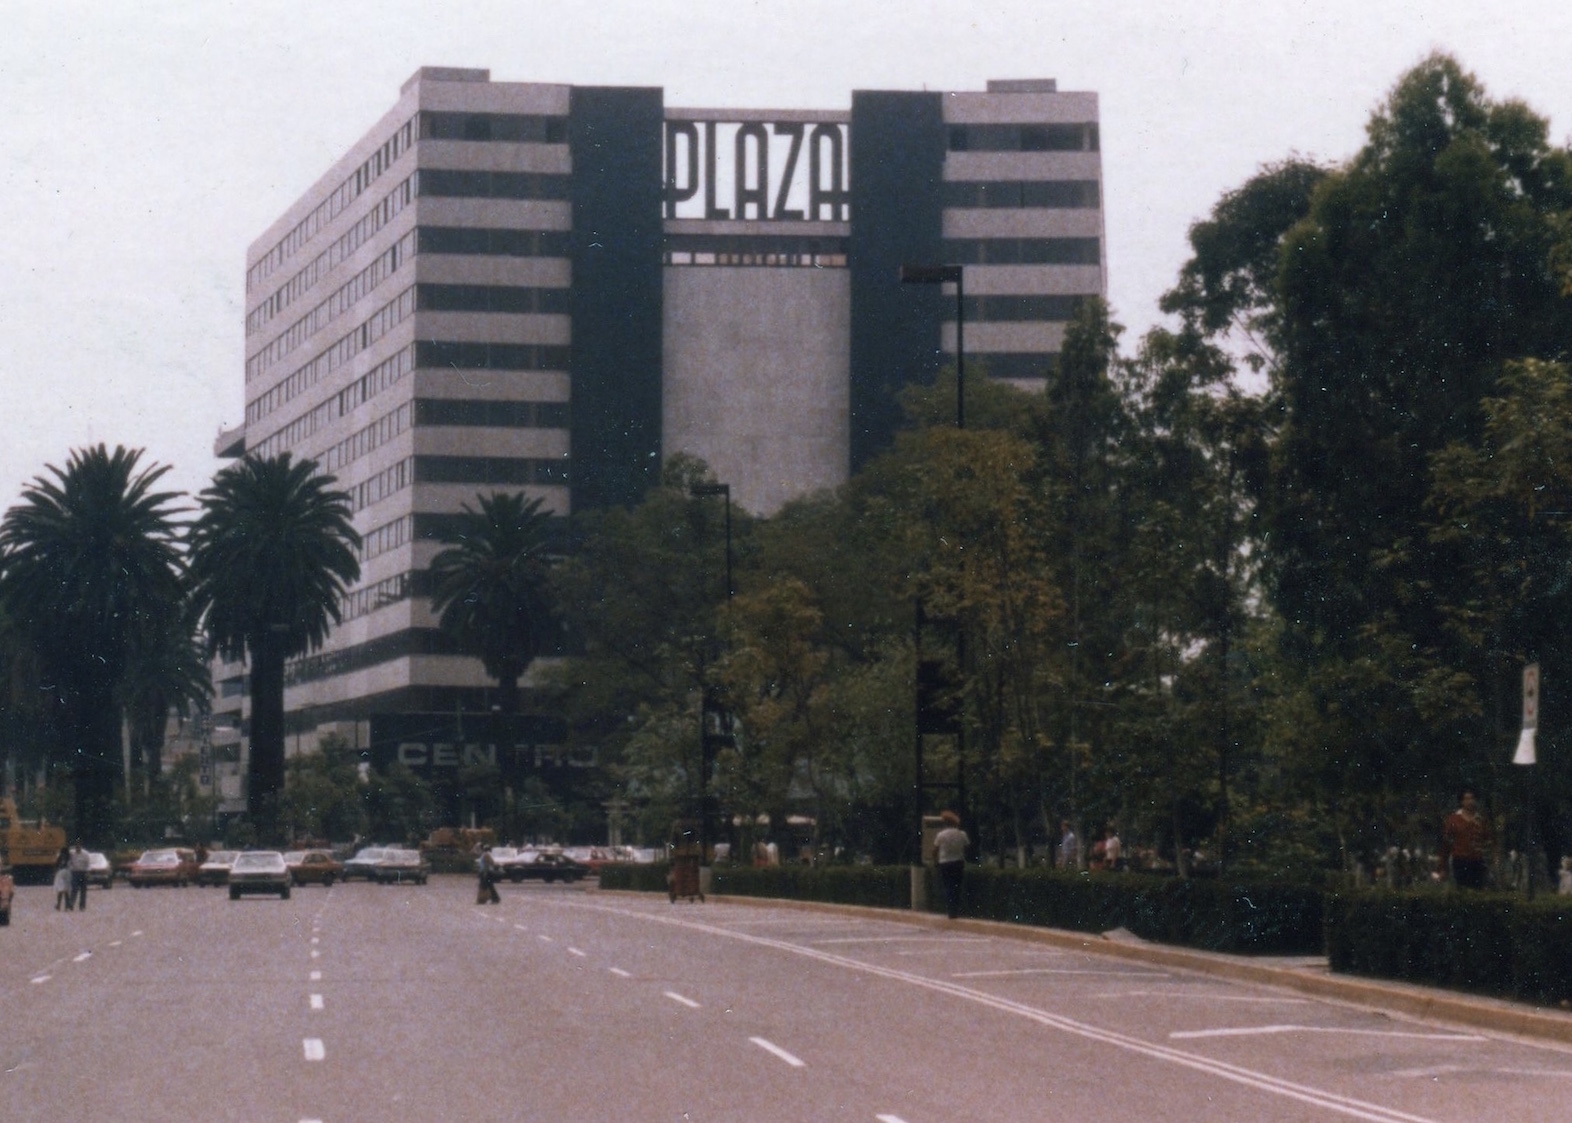 From movies to concerts: The history of Plaza Condesa